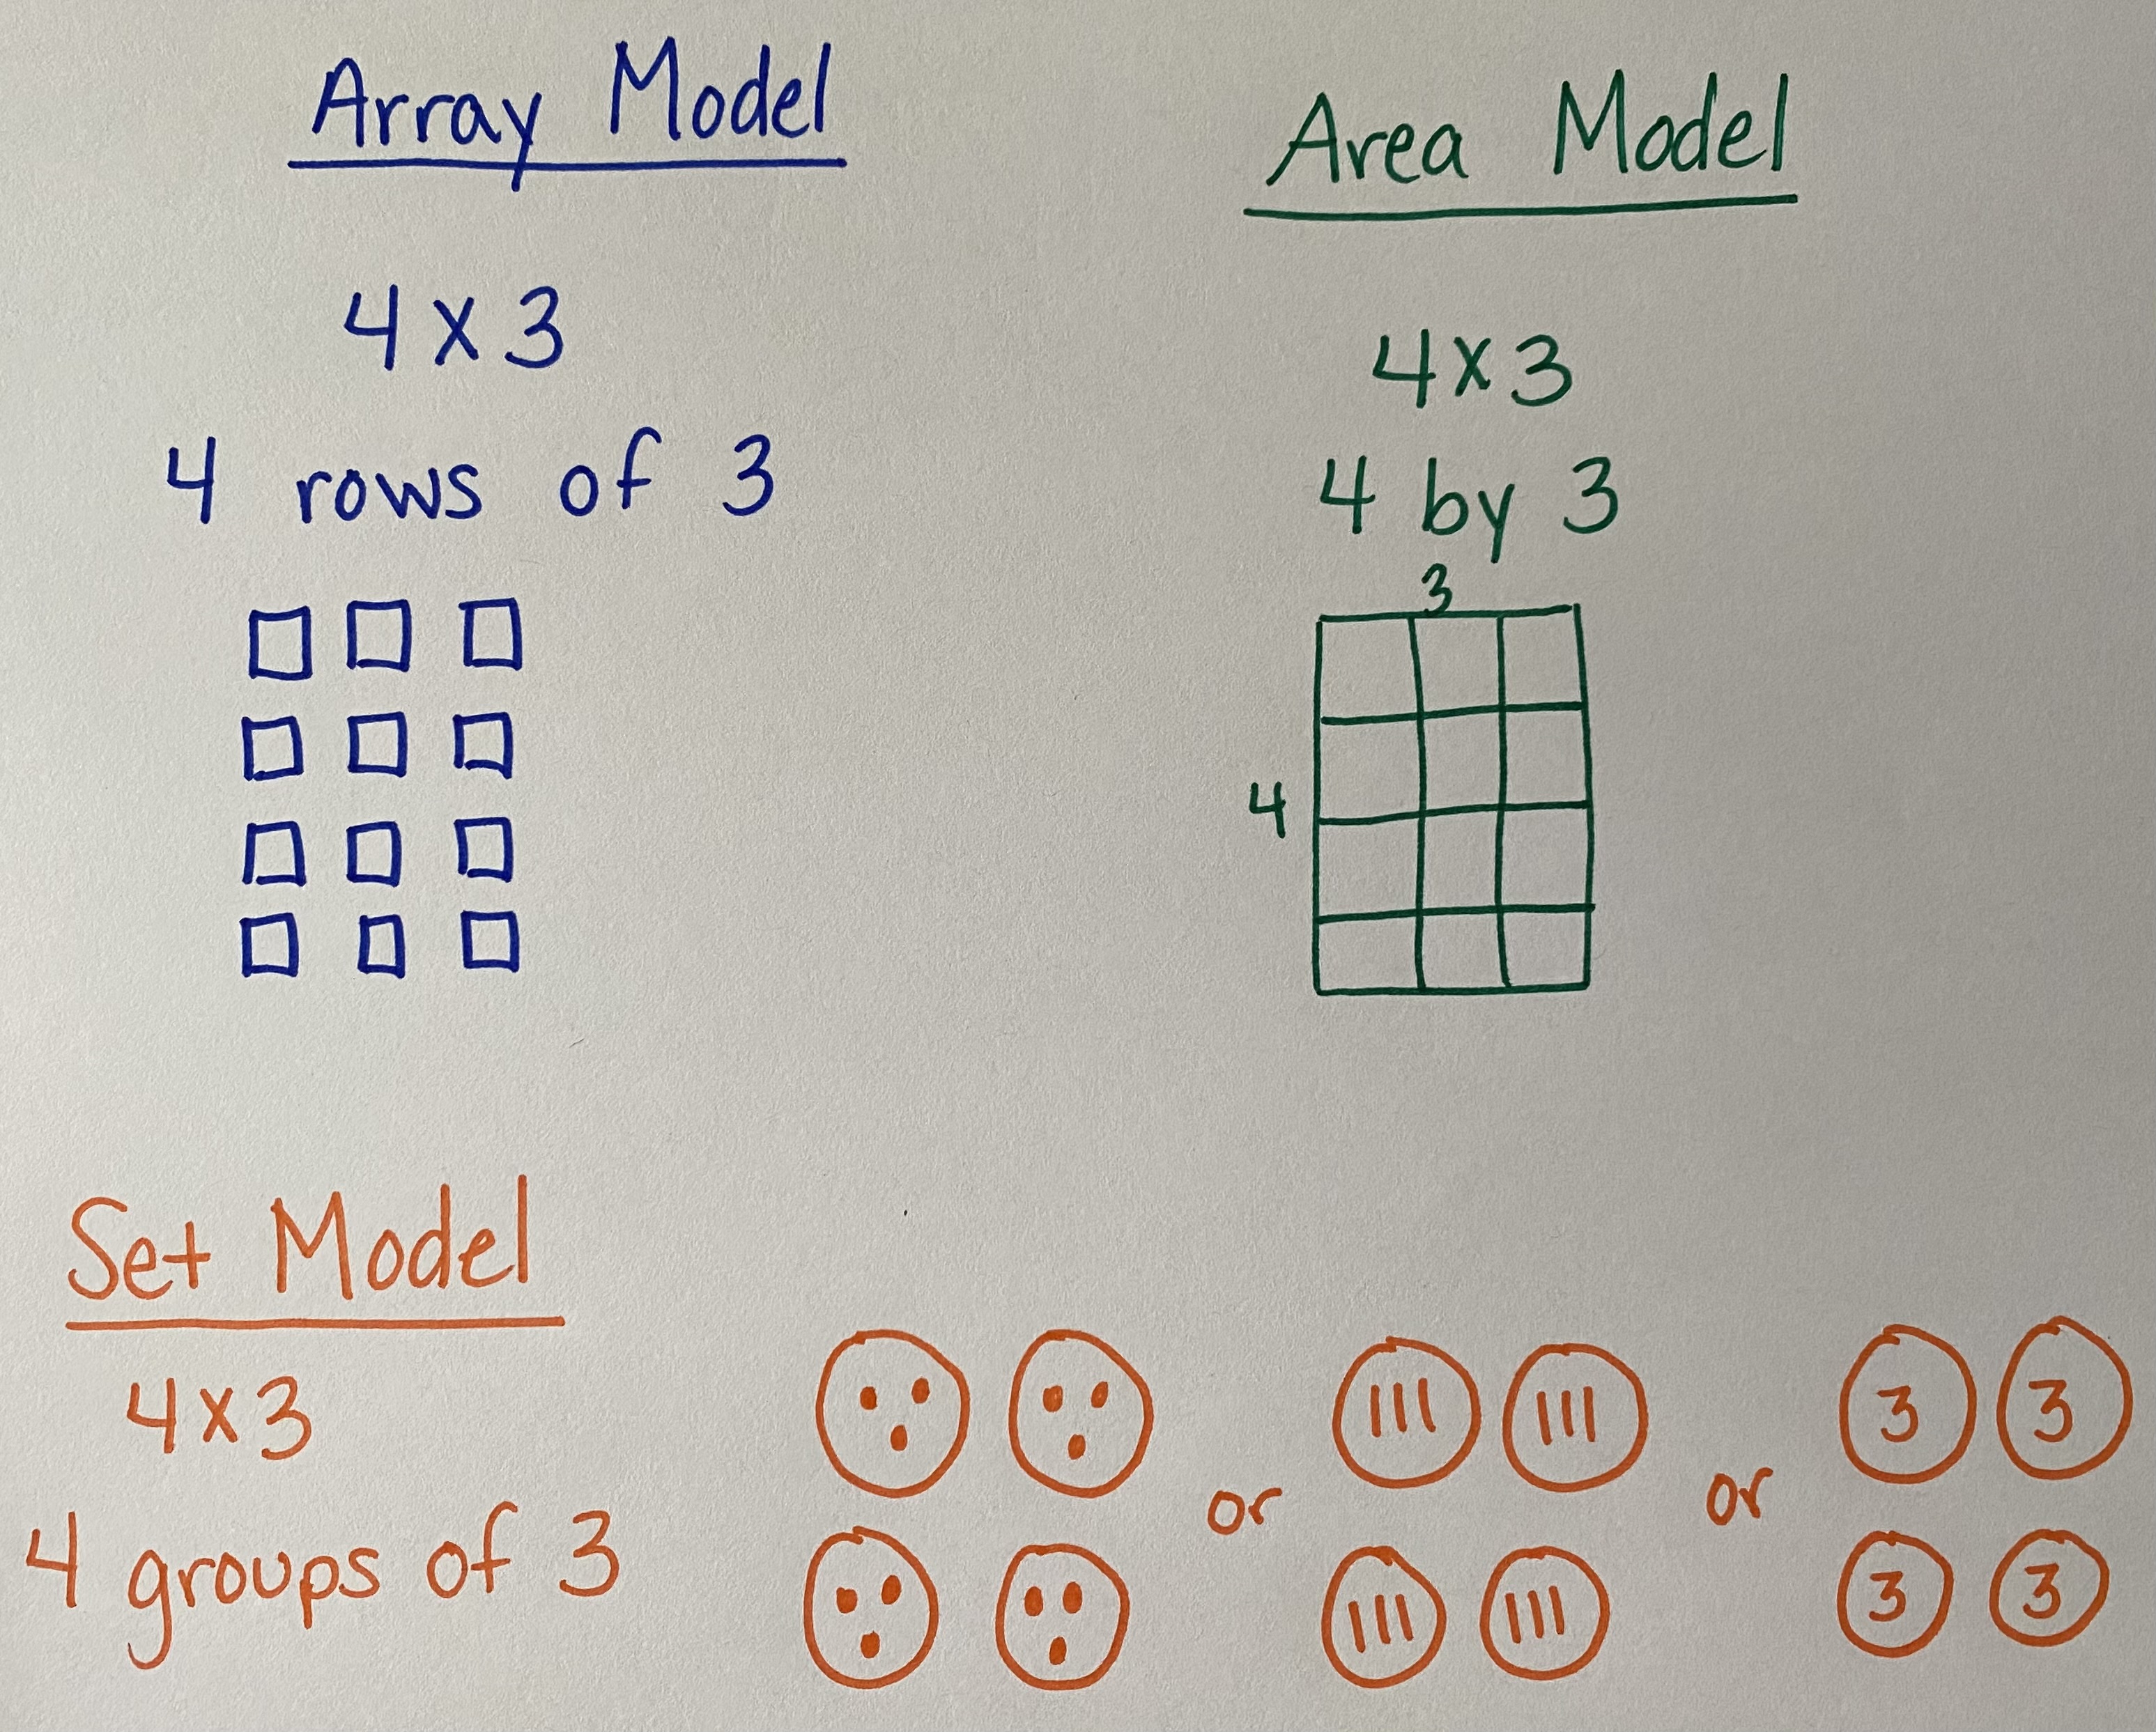 Array, area, and set models for 4x3 Multiplication